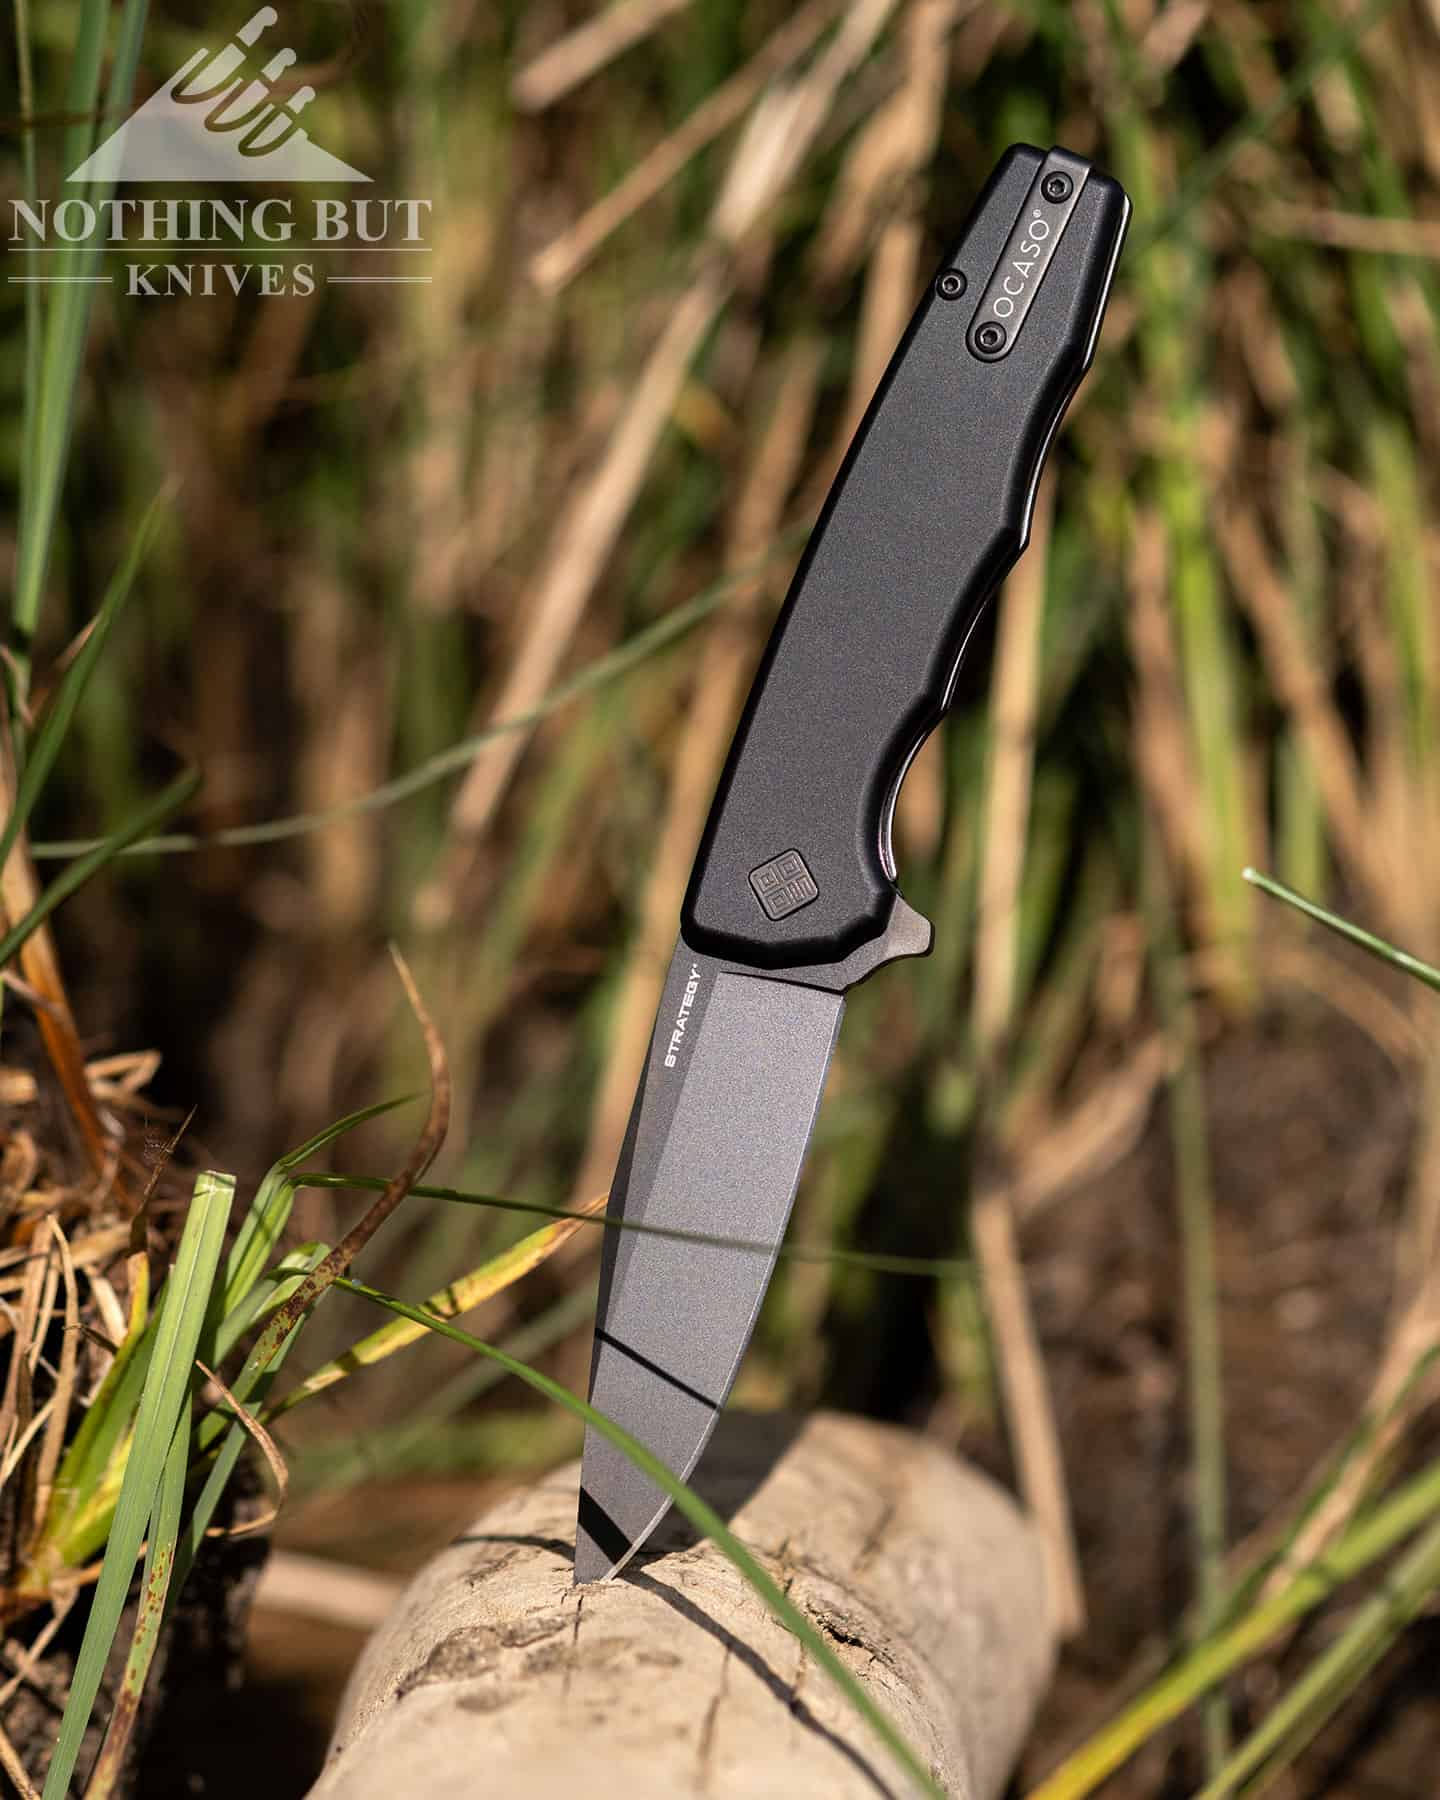 The Ocaso Strategy is a practical gentlemen's folder style knife that comes in a variety of handle and blade options.